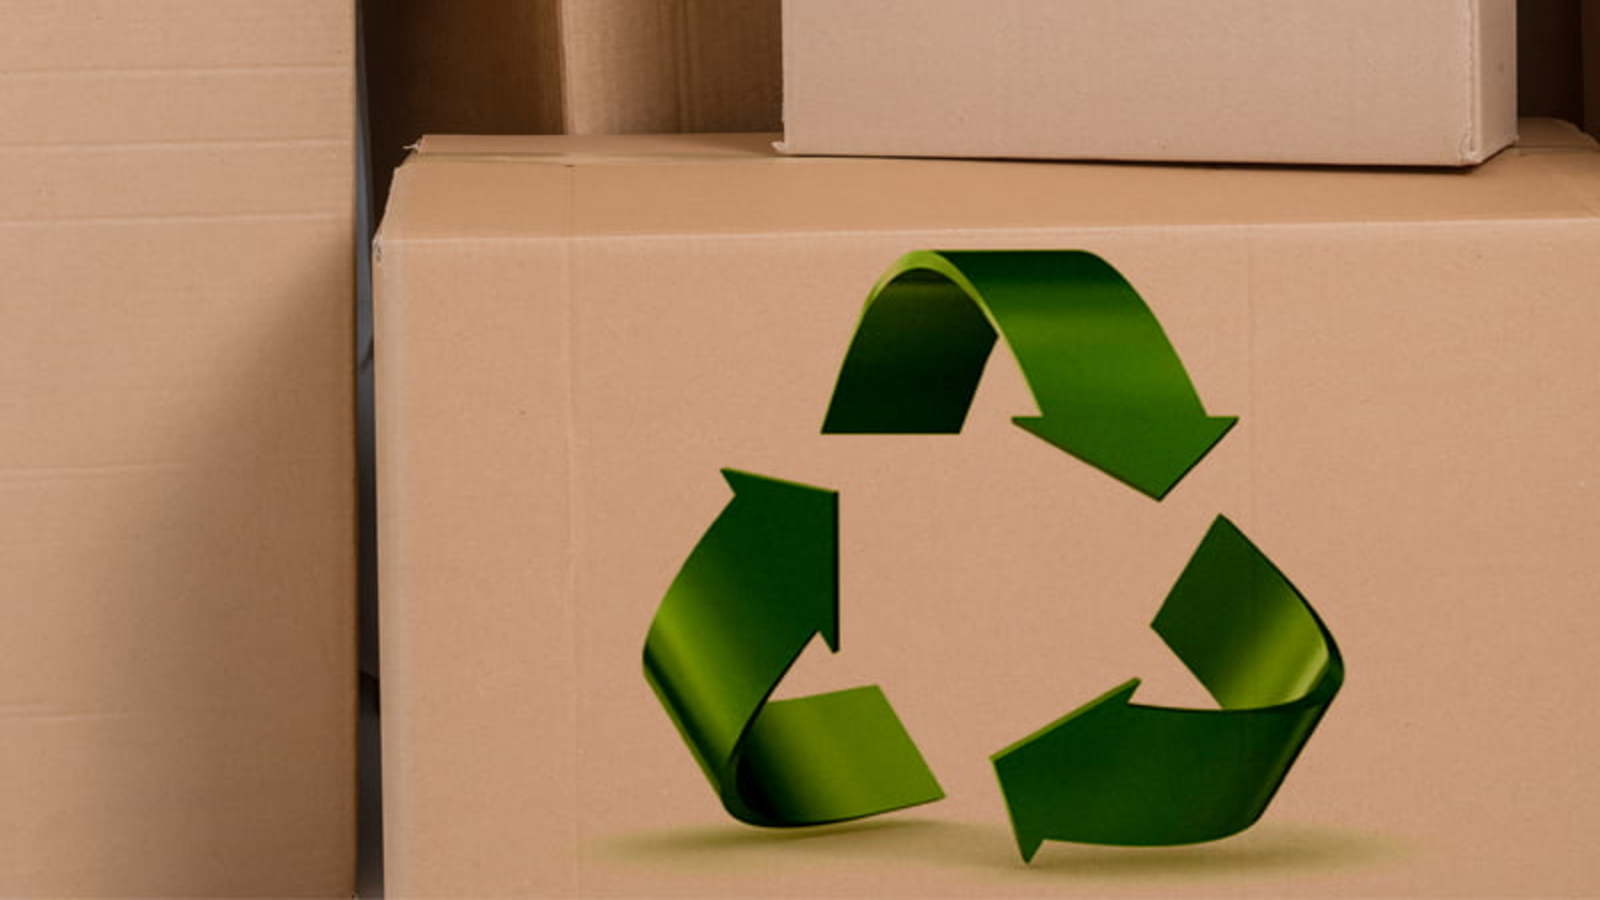 Angolan Sunavest Group invests US$15m in paper recycling unit, Ugandan plastic manufacturer lament over rising costs